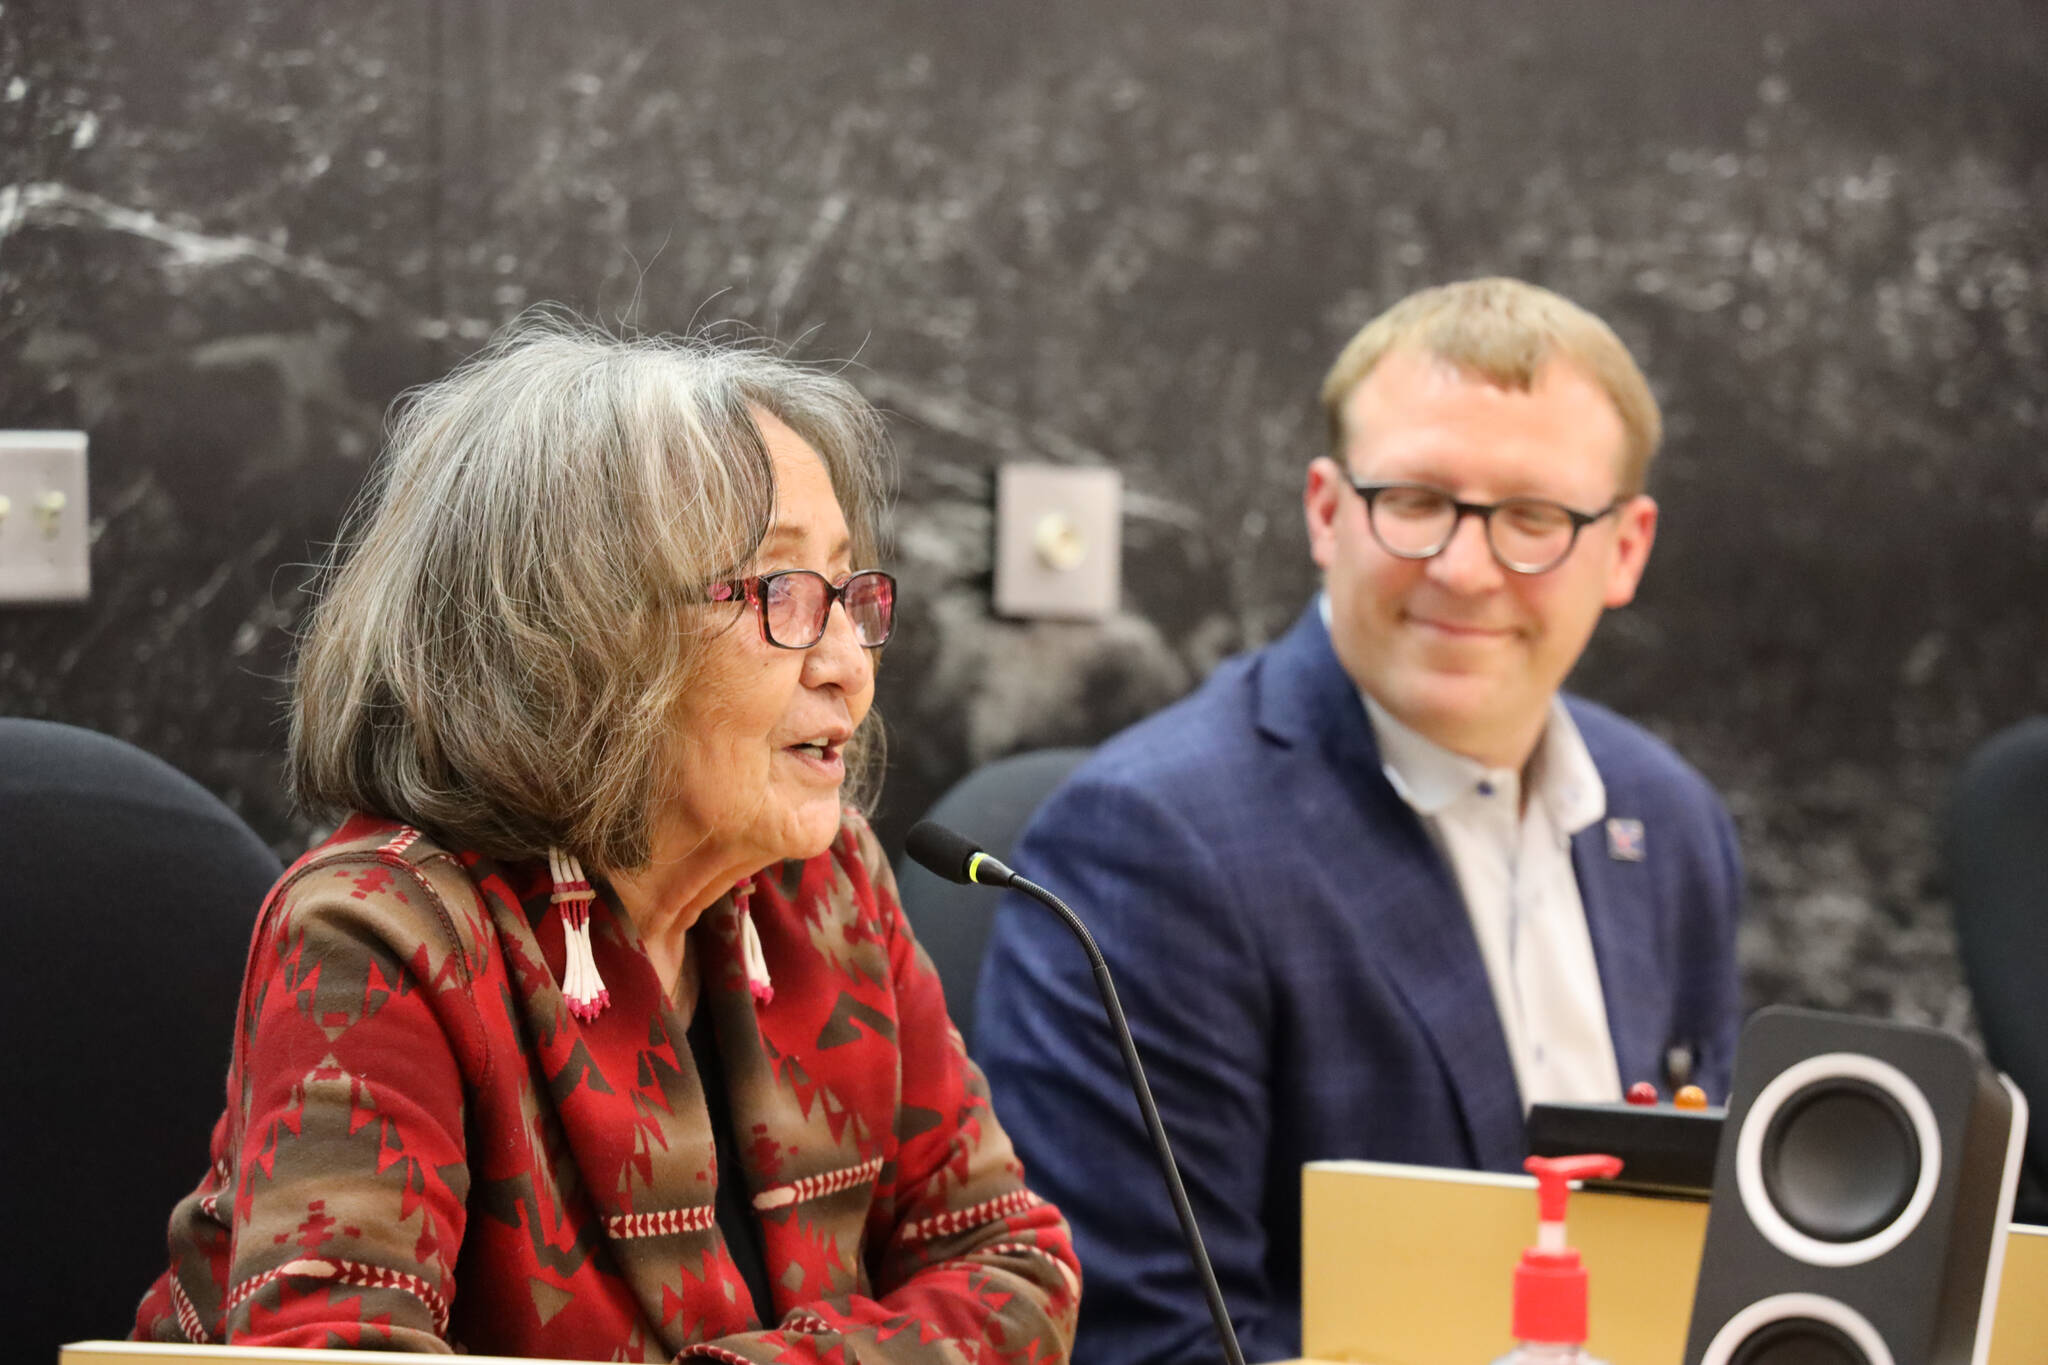 Sealaska Heritage Institute President Rosita Worl speaks to the City and Borough of Juneau Planning Commission Tuesday night in support for downtown Juneau’s South Seward Street to be renamed Heritage Way. (Clarise Larson / Juneau Empire)